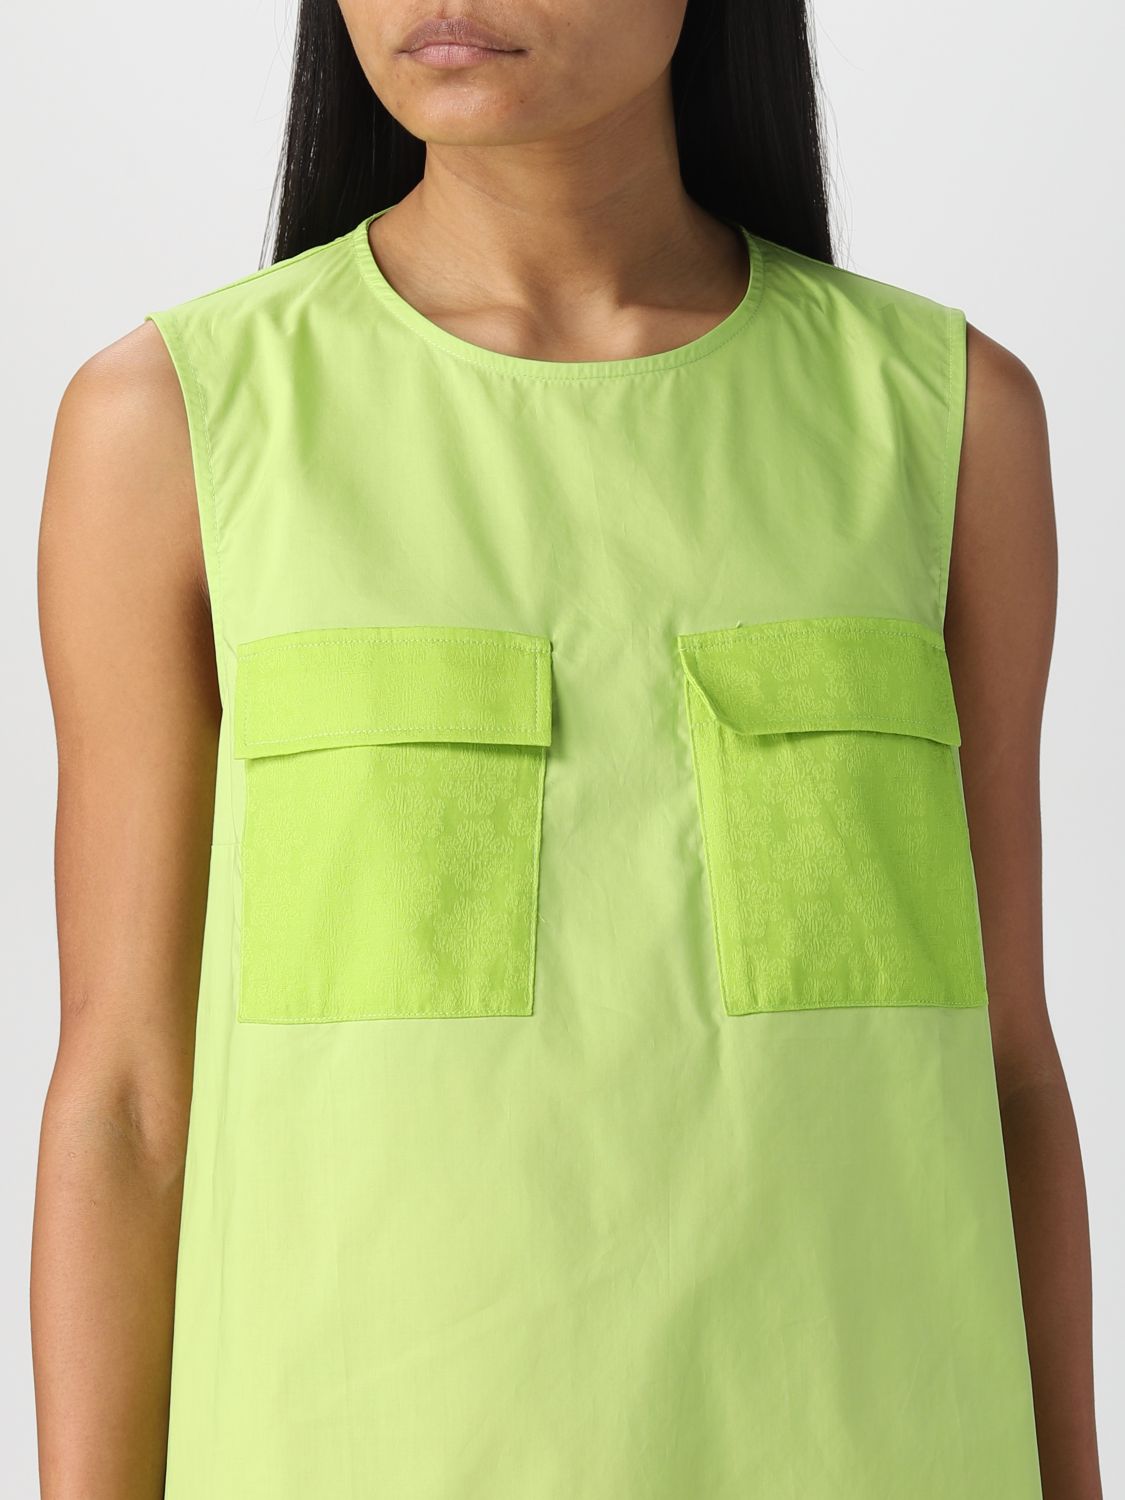 Top Semicouture: Top Semicouture para mujer verde 3